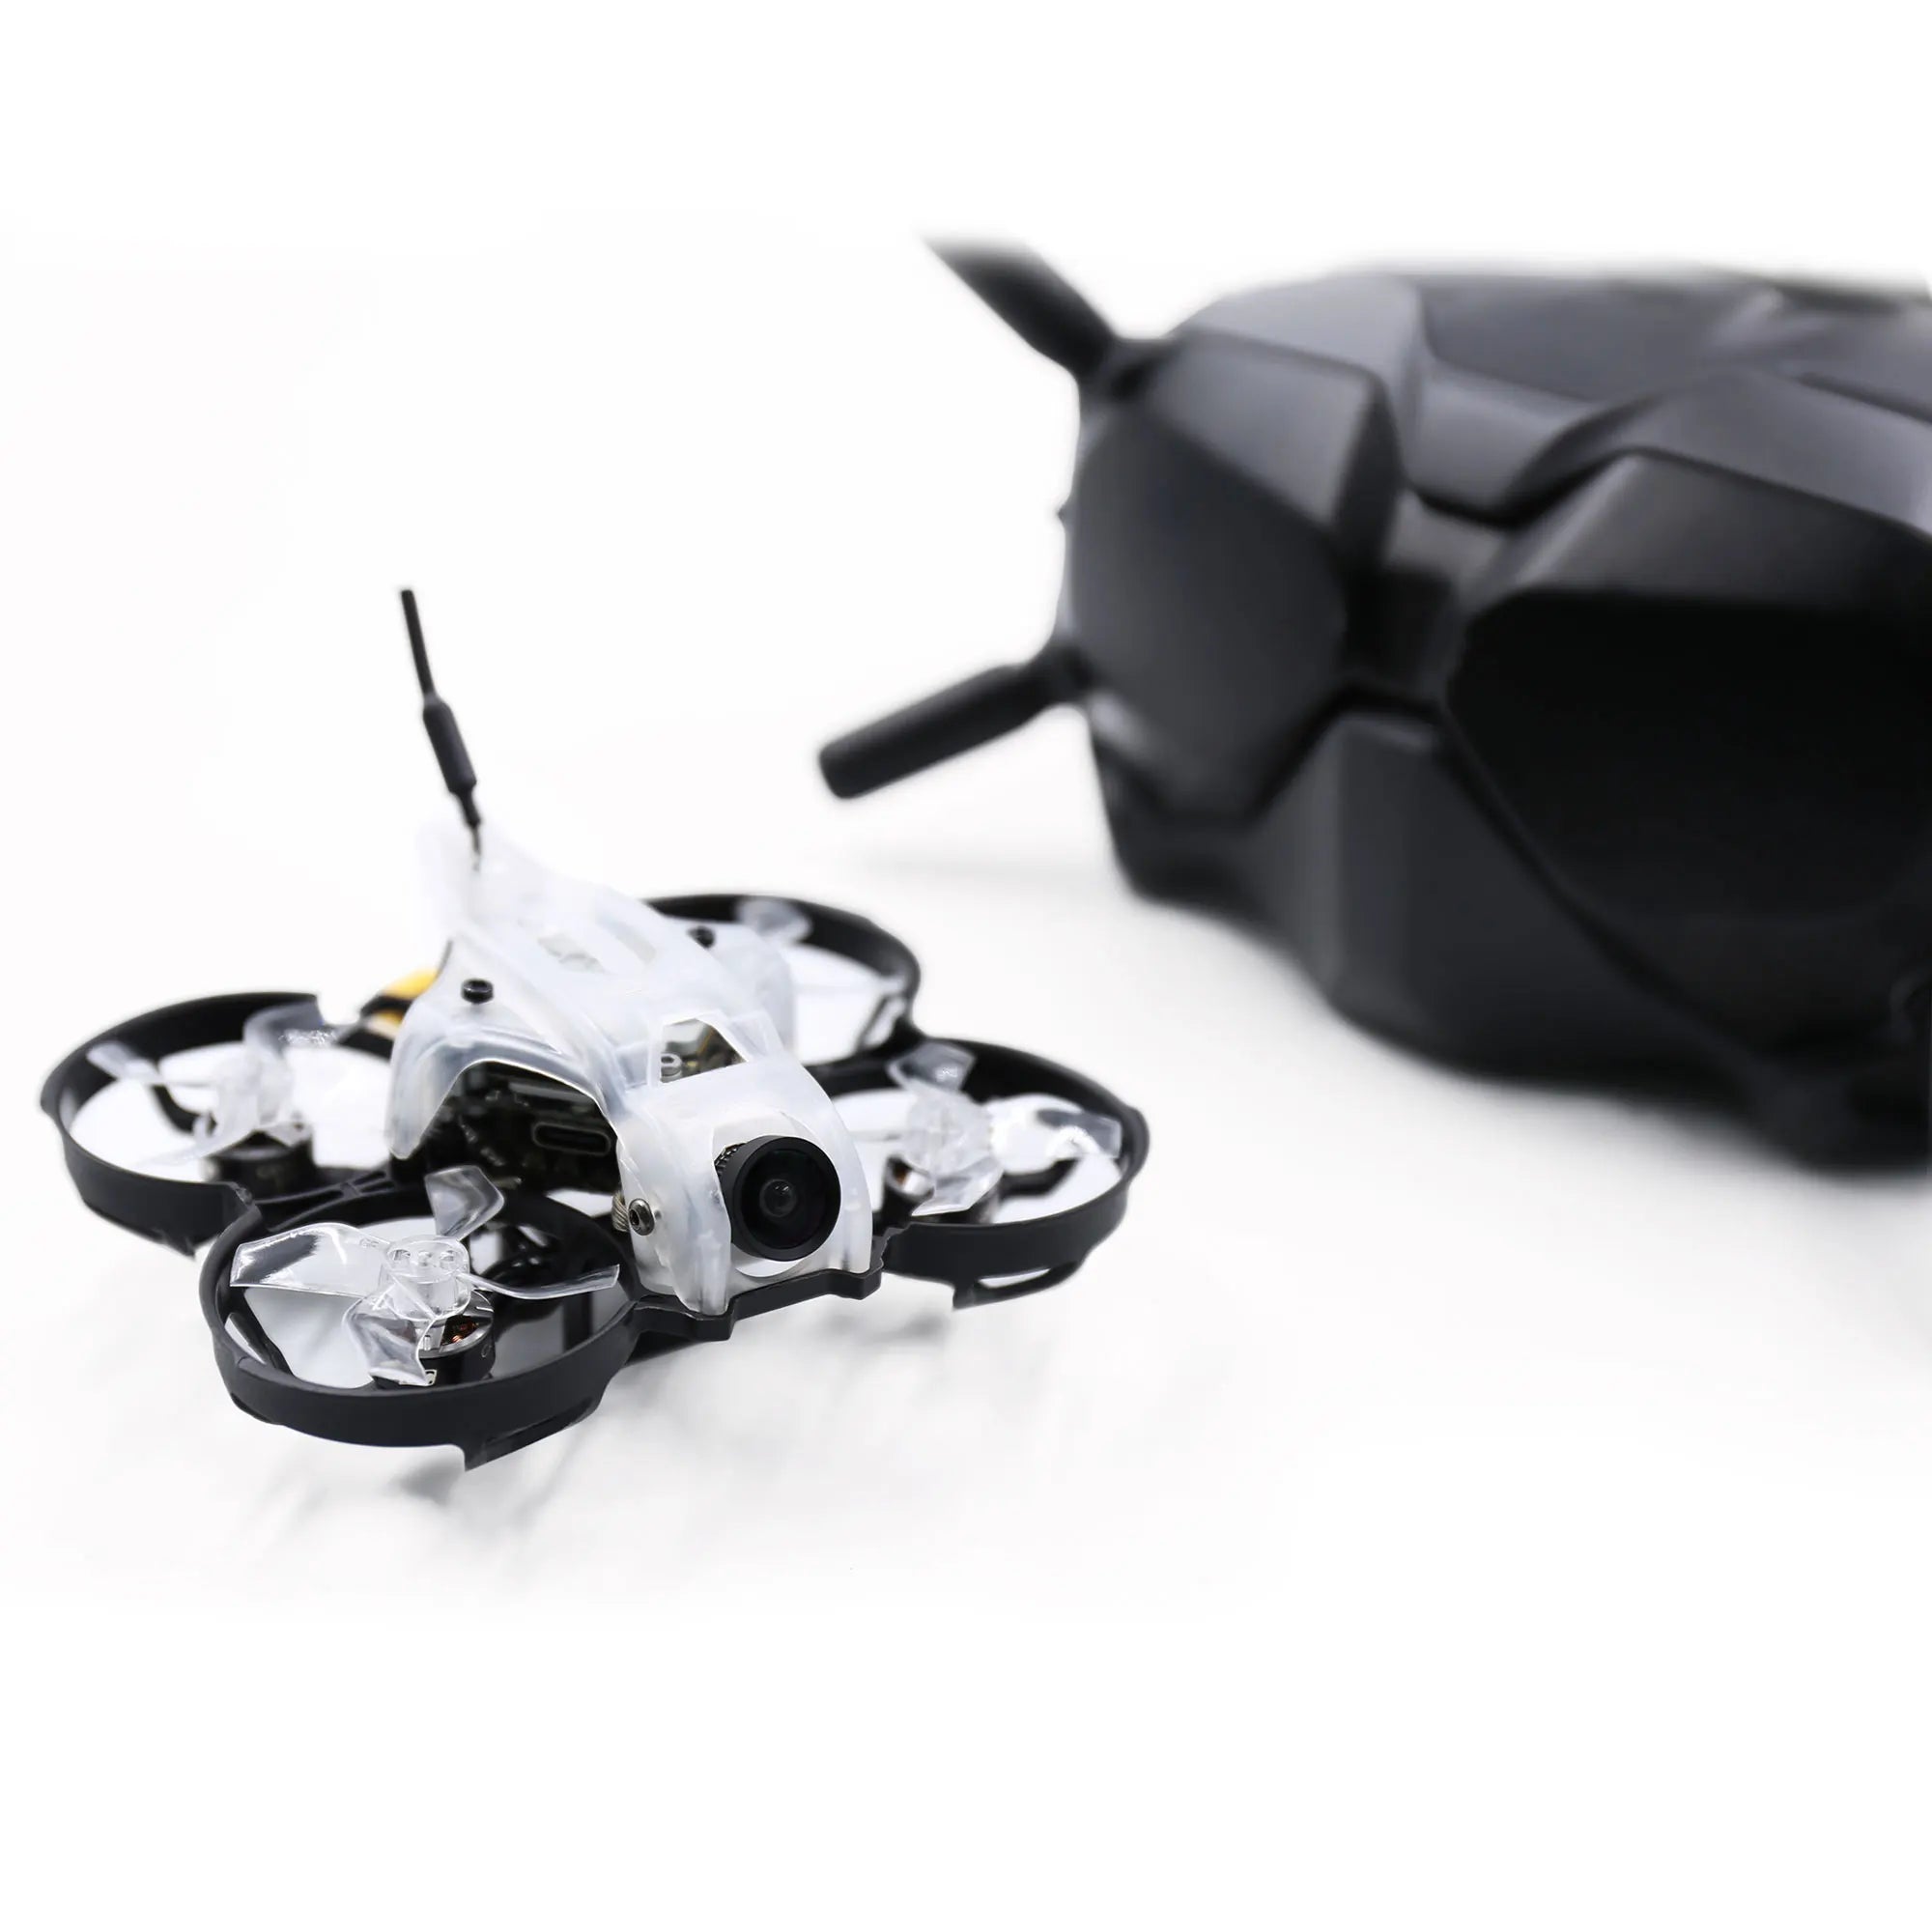 GEPRC Thinking P16 FPV Drone, All-new Thinking P16 HD binds to your transmitter or your favorite receiver .